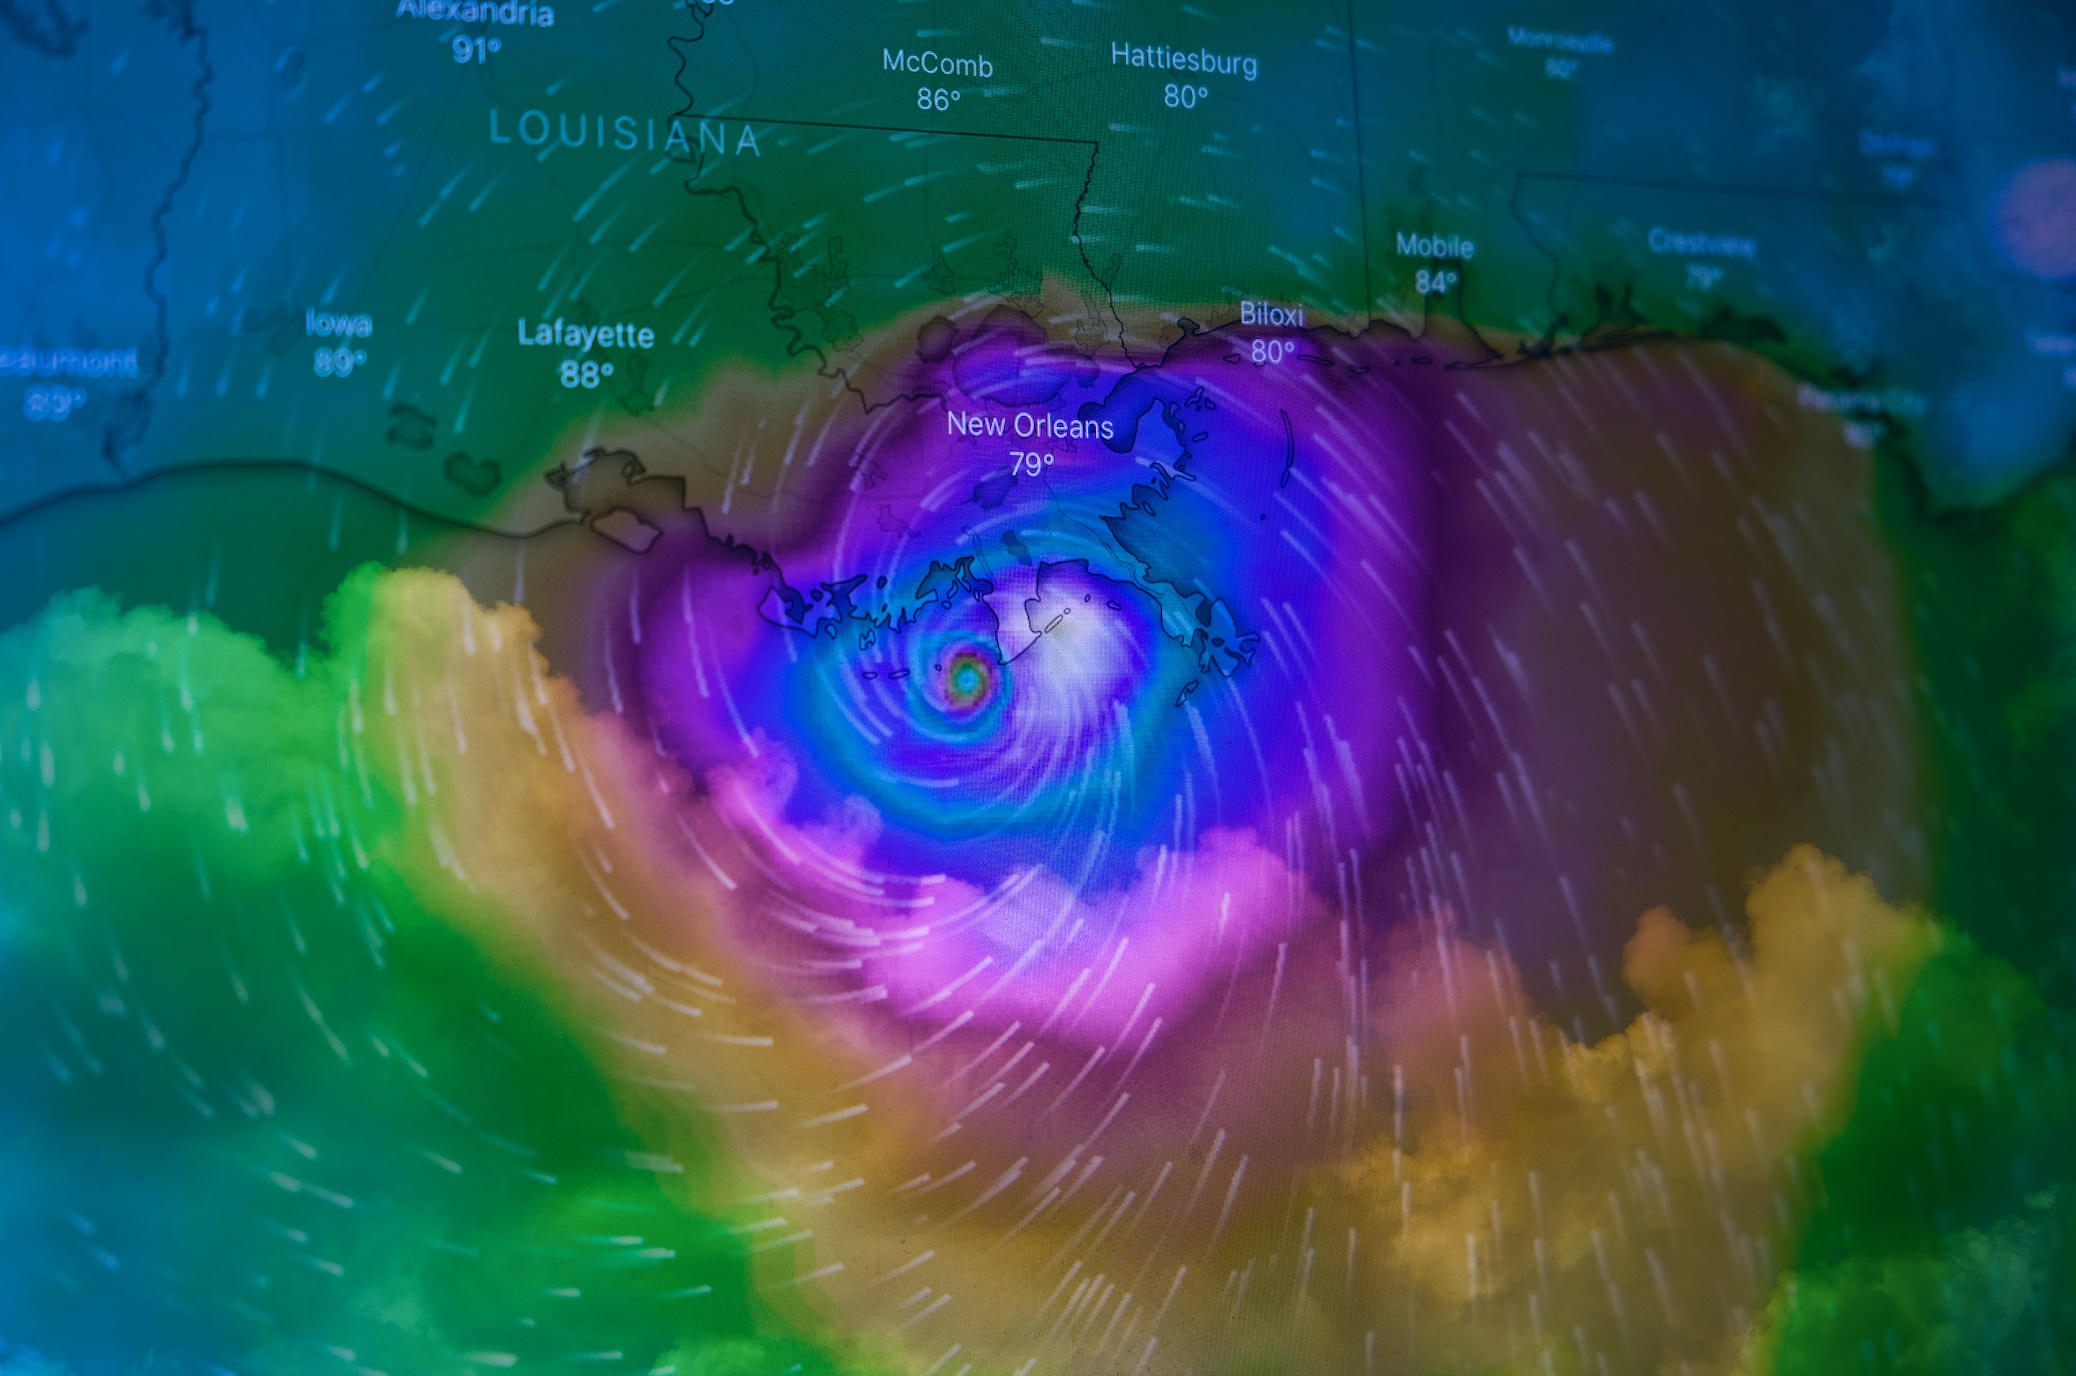 Double exposure of Hurricane Ida approaching New Orleans on August 29, 2021; image by Brian McGowan, via Unsplash.com.